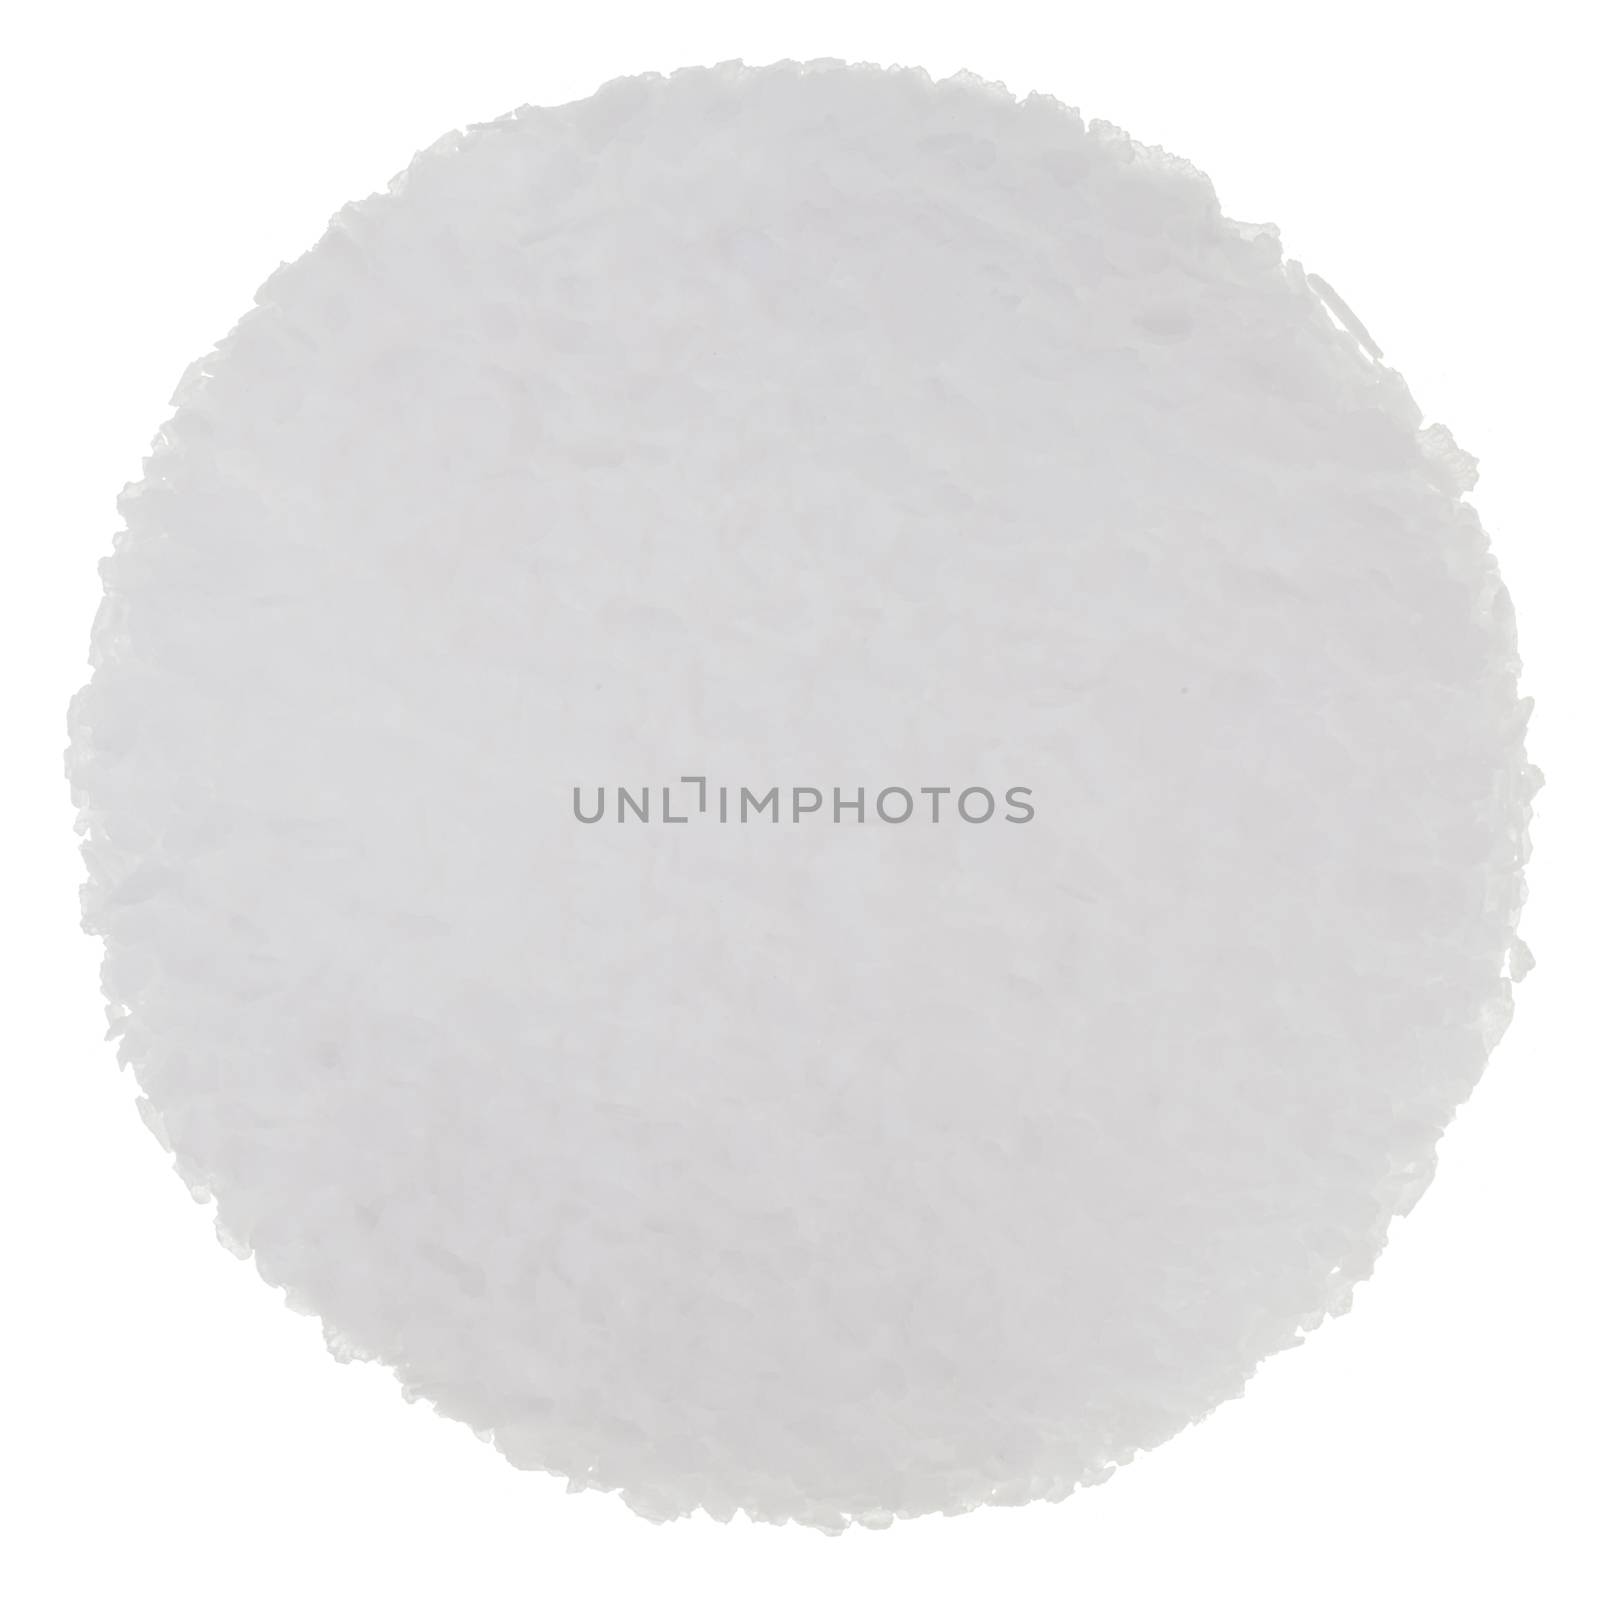 Fleur de Sel (Sea Salt) Isolated on white background on a perfect Circle